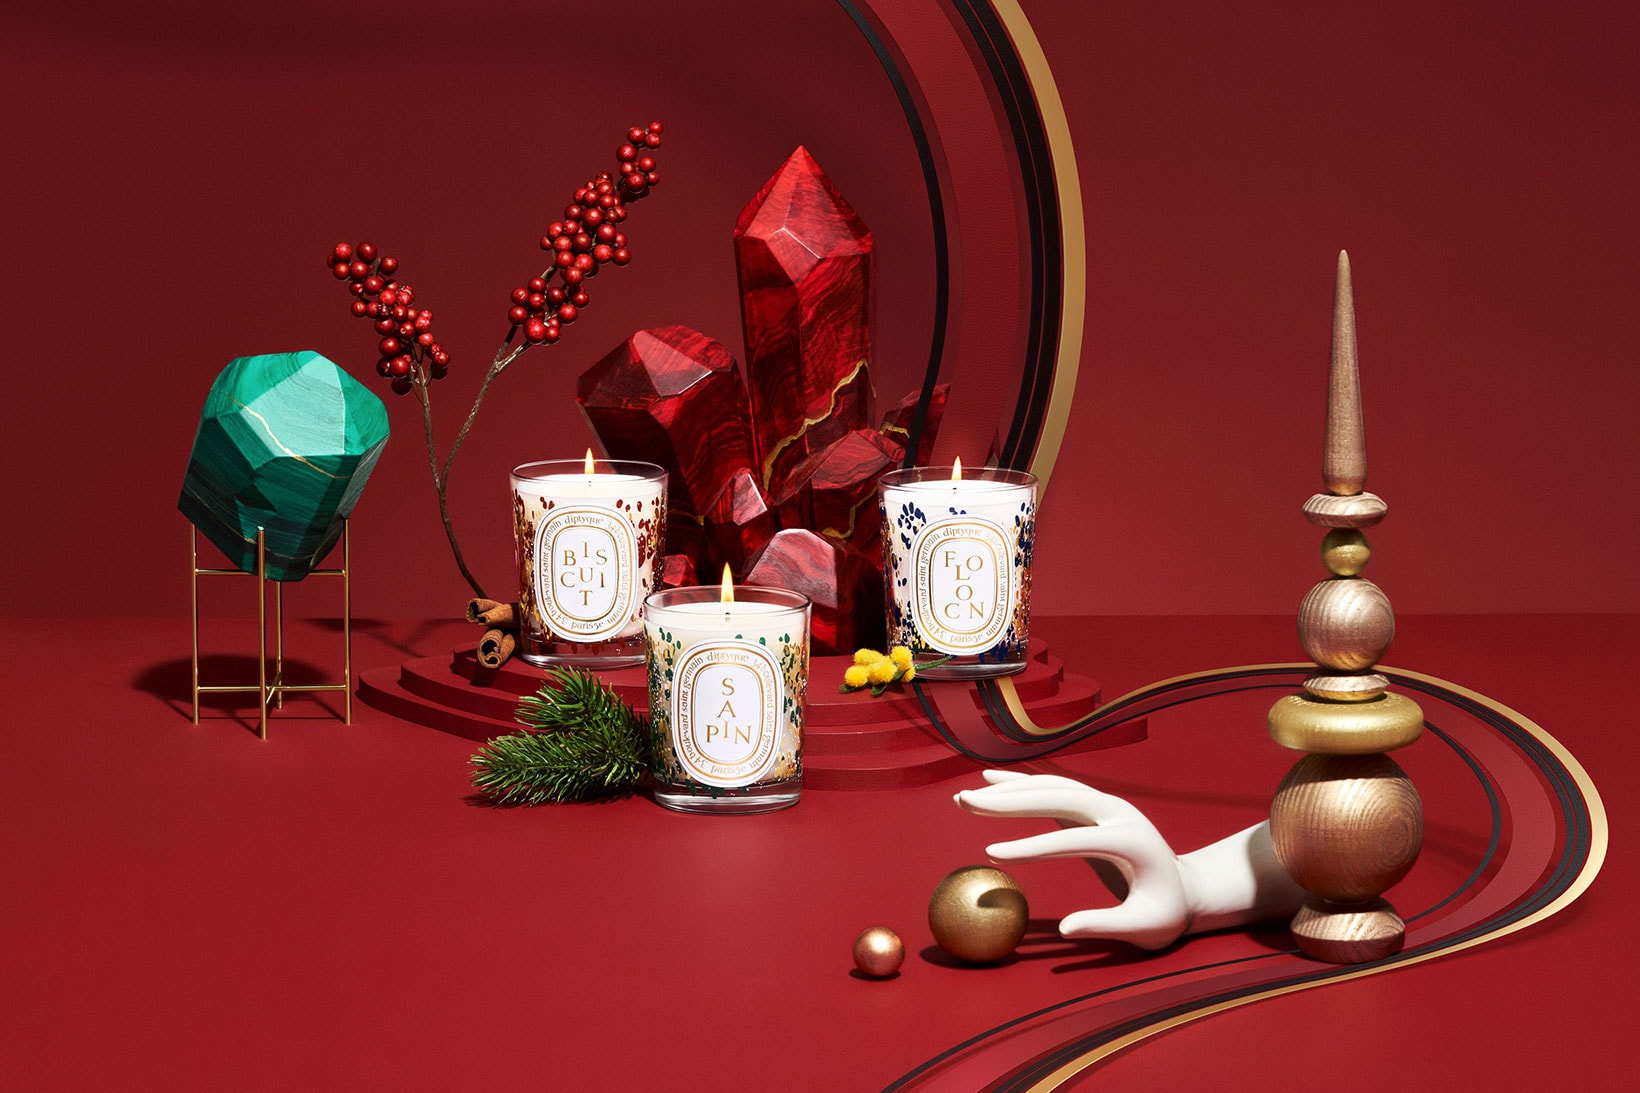 diptyque Holiday Christmas Fragrances Candles